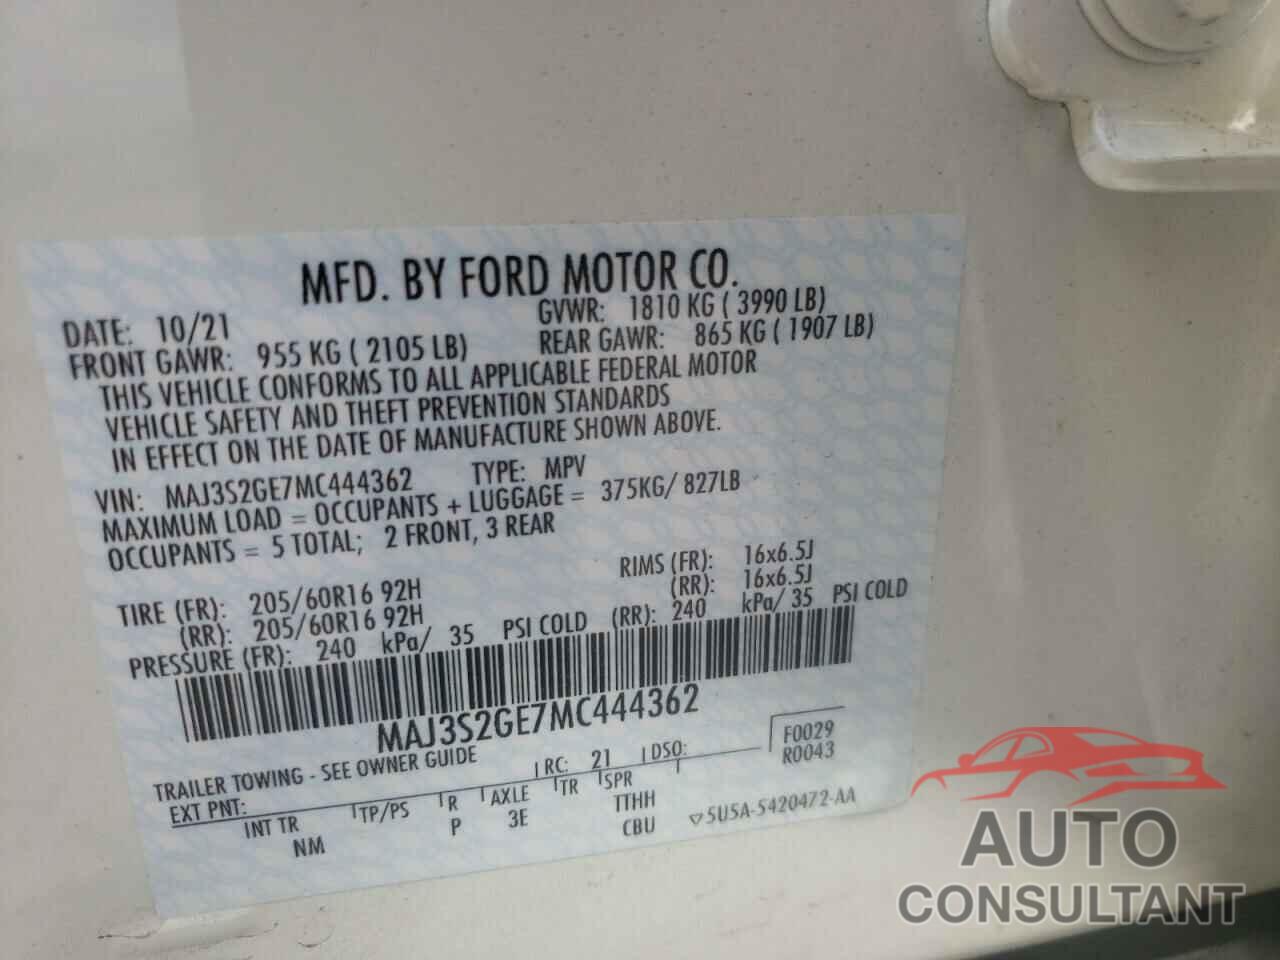 FORD ALL OTHER 2021 - MAJ3S2GE7MC444362